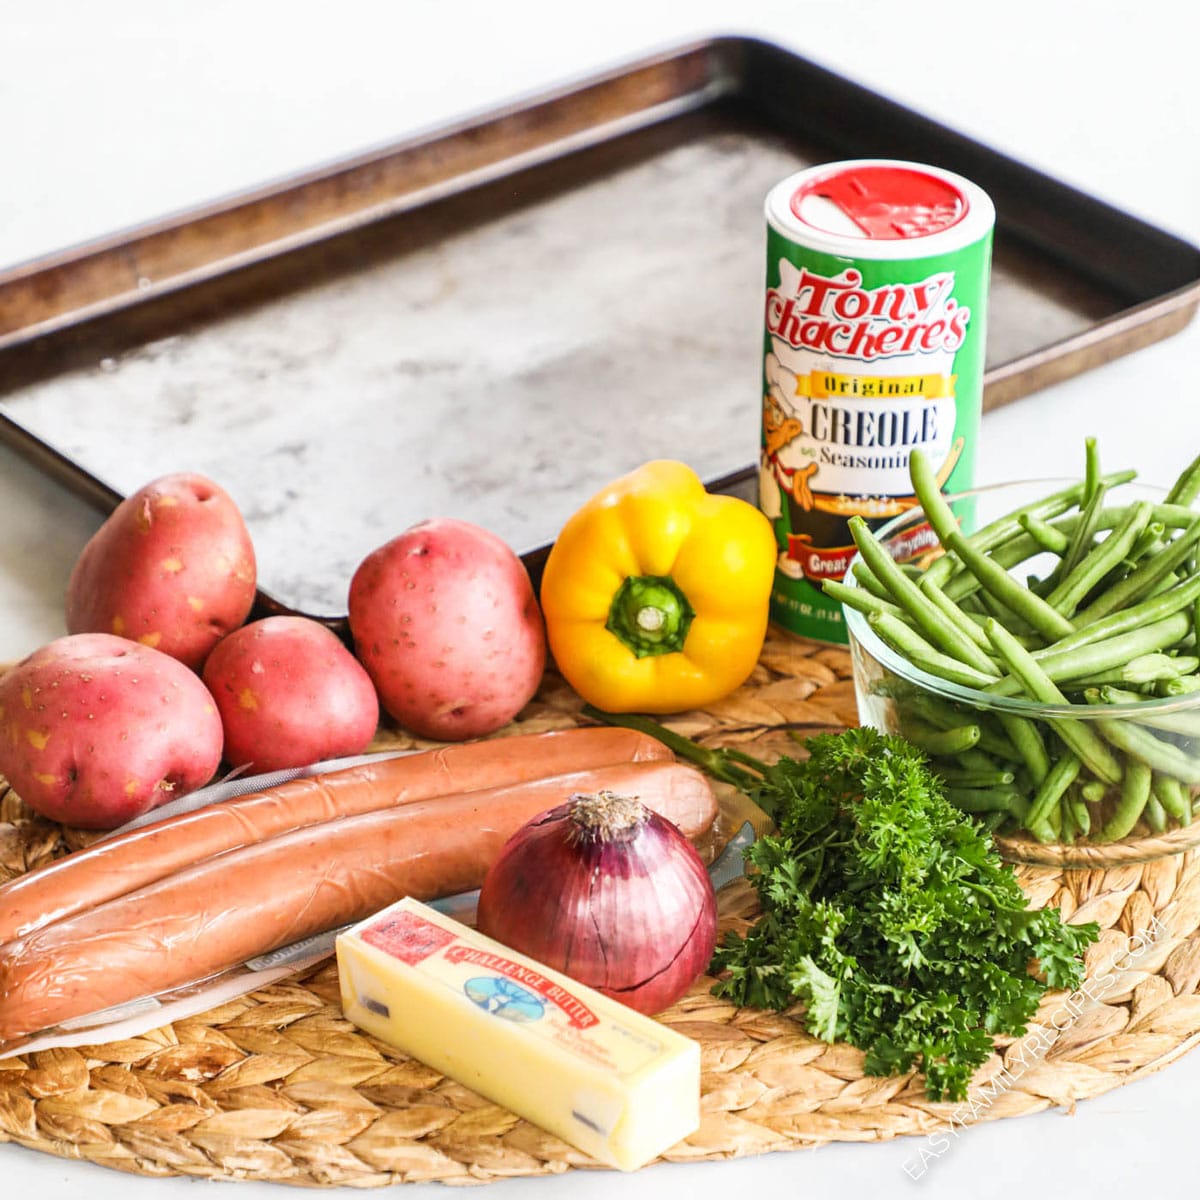 Ingredients to make sausage and potatoes sheet pan meal including cajun seasoning, green beans, potatoes, bell pepper, parsley, red onion, and butter.